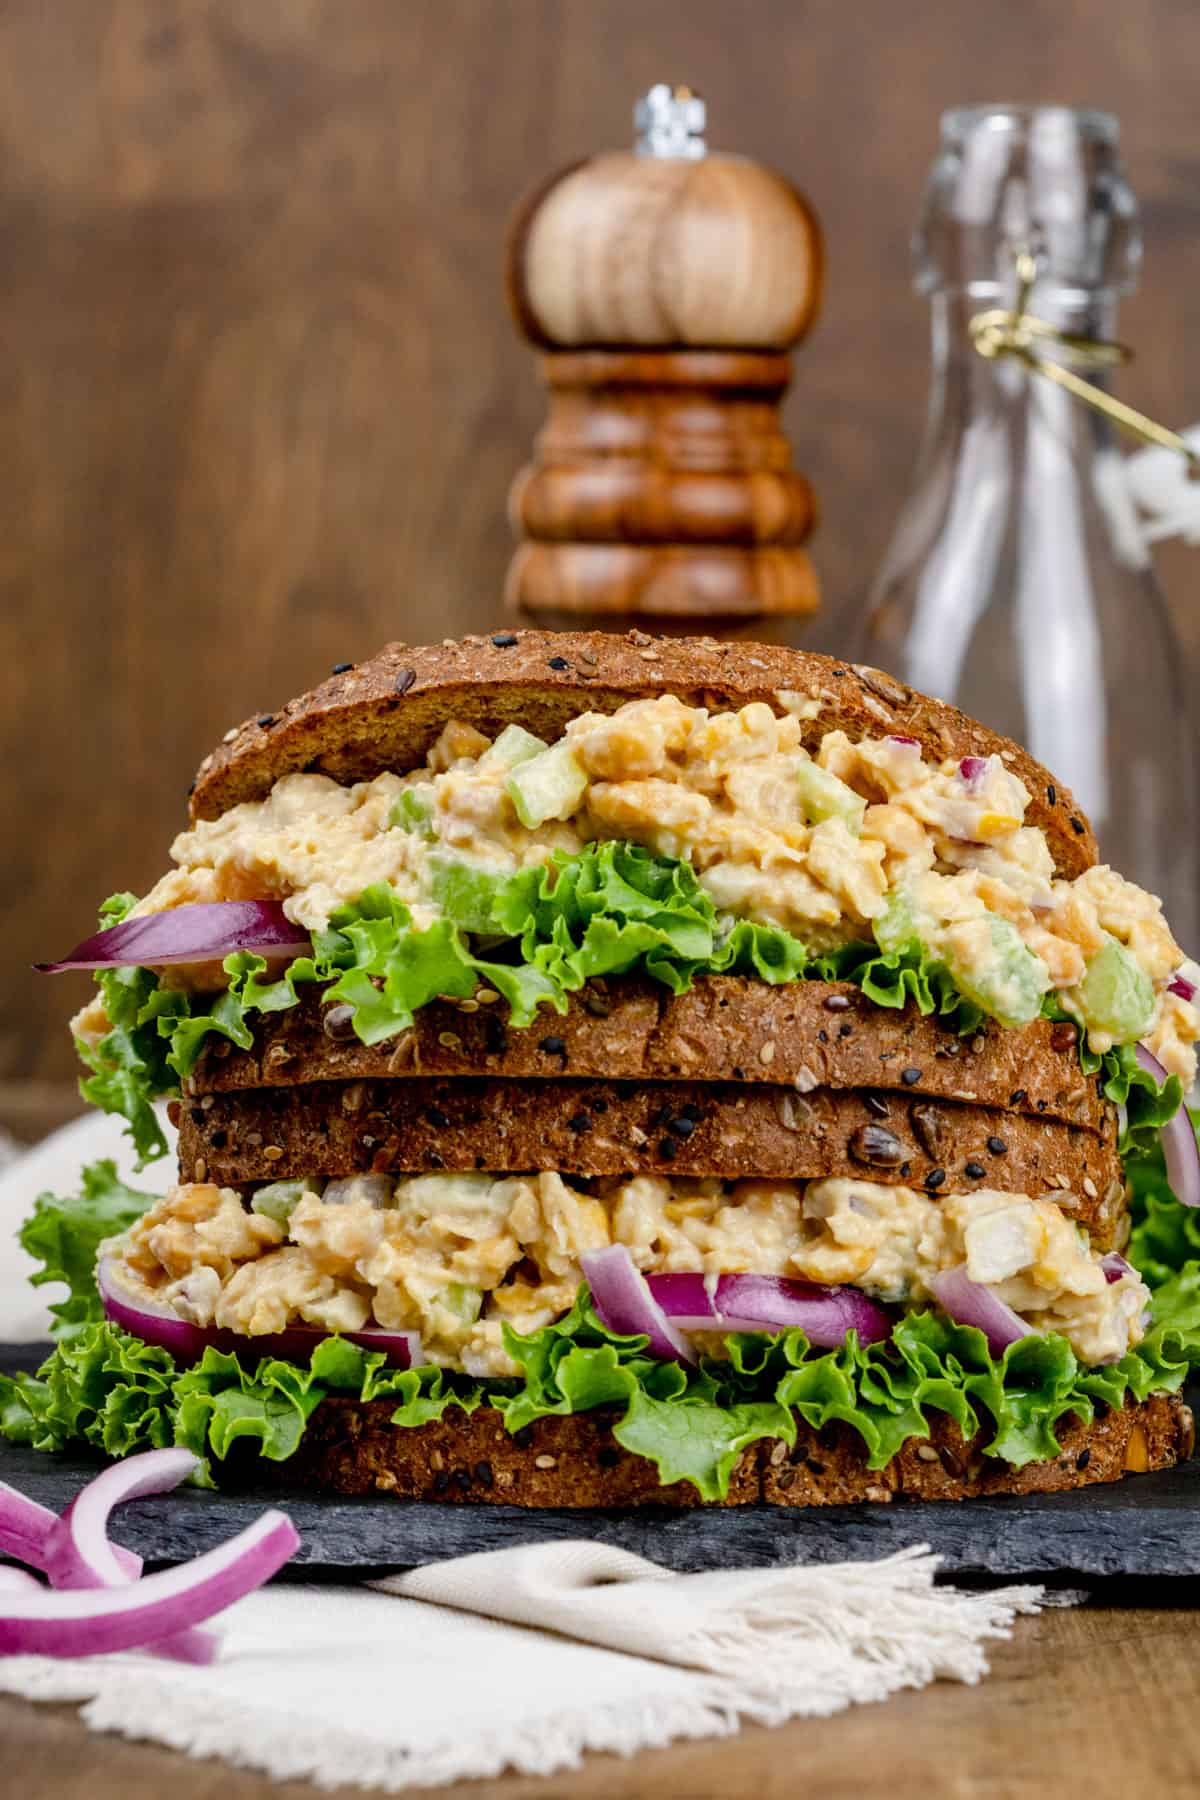 Two sandwiches stacked on top of each other filled with a mock tuna chickpea of the sea filling on hearty brown bread. Slices of red onion are next to the sandwiches. In this image, the glass jar is blurred in the background on the right side of the image.